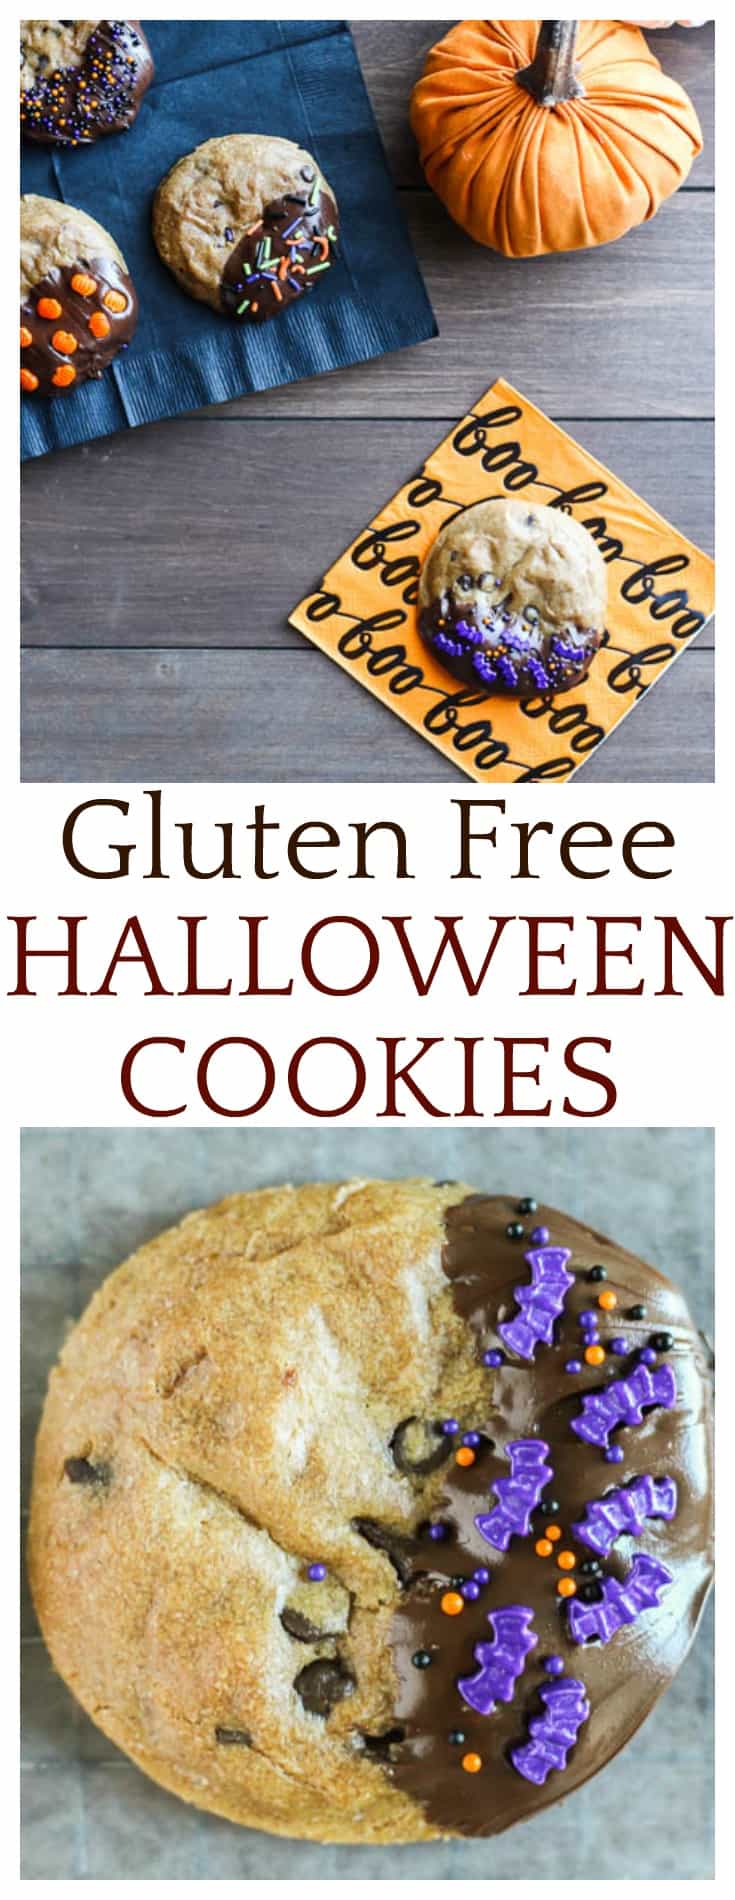 Keep all your ghosts and ghouls happy with these Gluten Free Halloween Cookies! I use Immaculate Baking Company's refrigerated dough so that making these Halloween treats is a snap! Who doesn't love fresh baked cookies? 